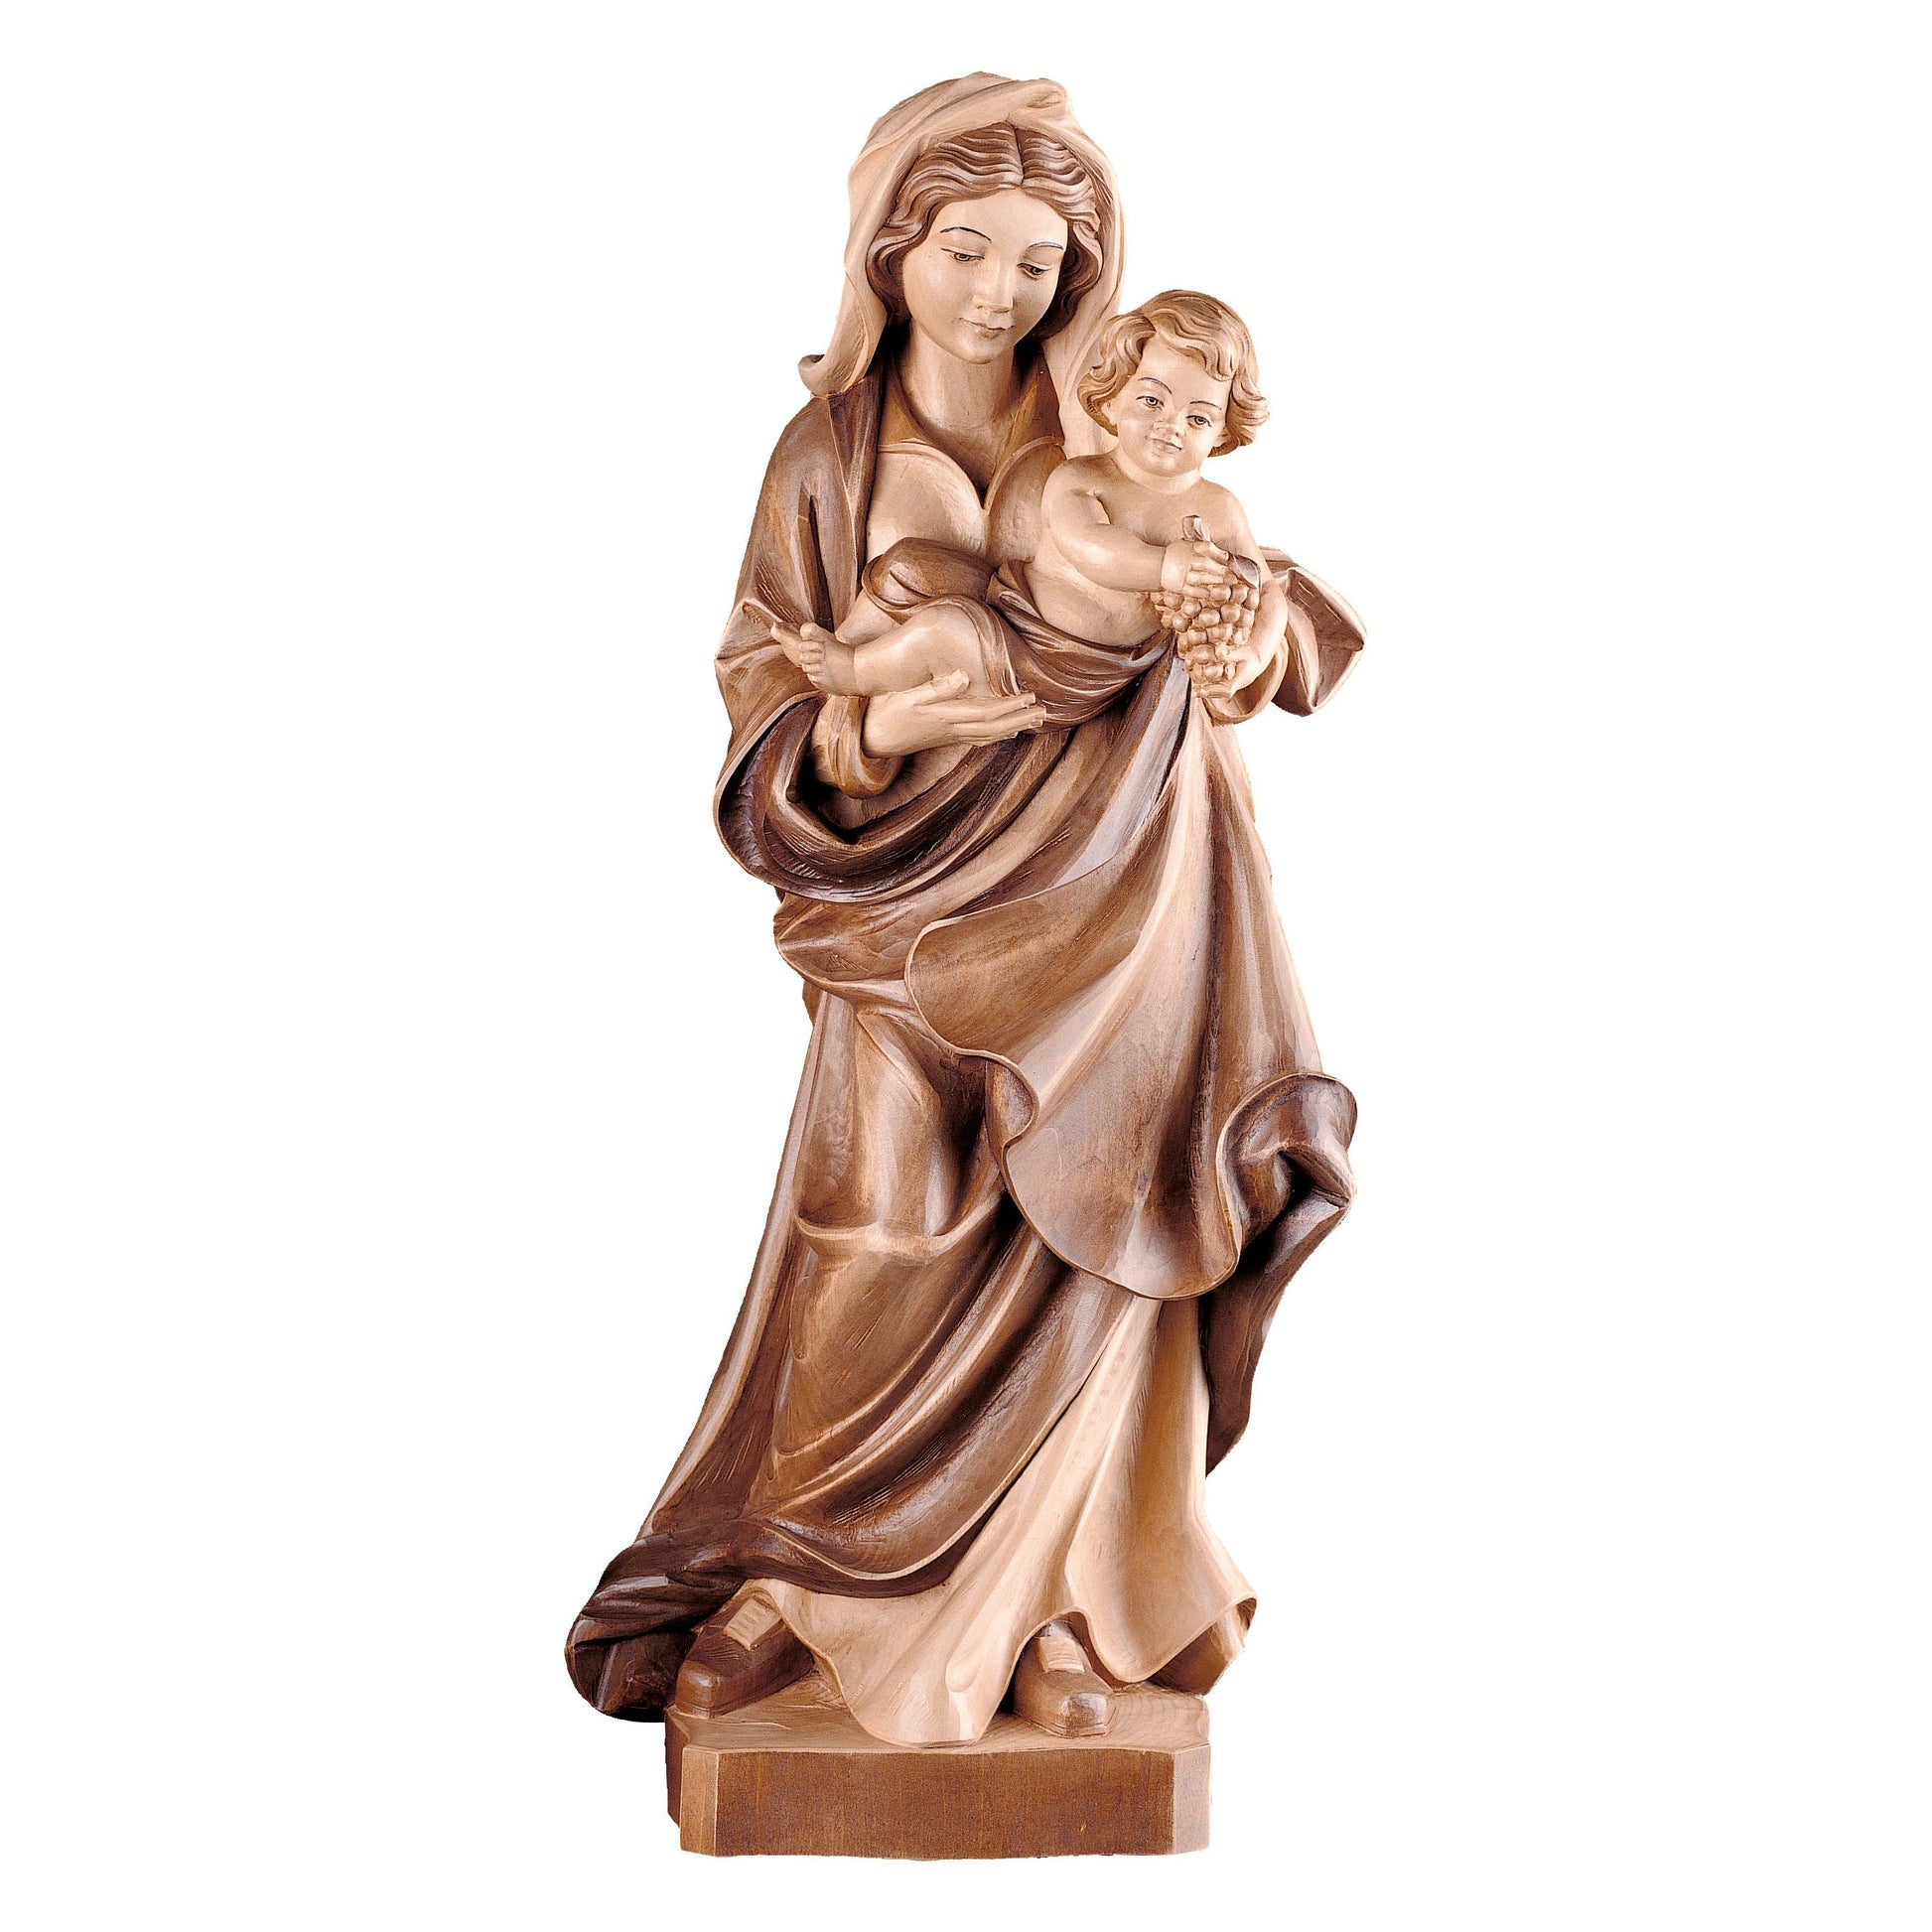 Mondo Cattolico Glossy / 15 cm (5.9 in) Wooden statue of Madonna of grapes